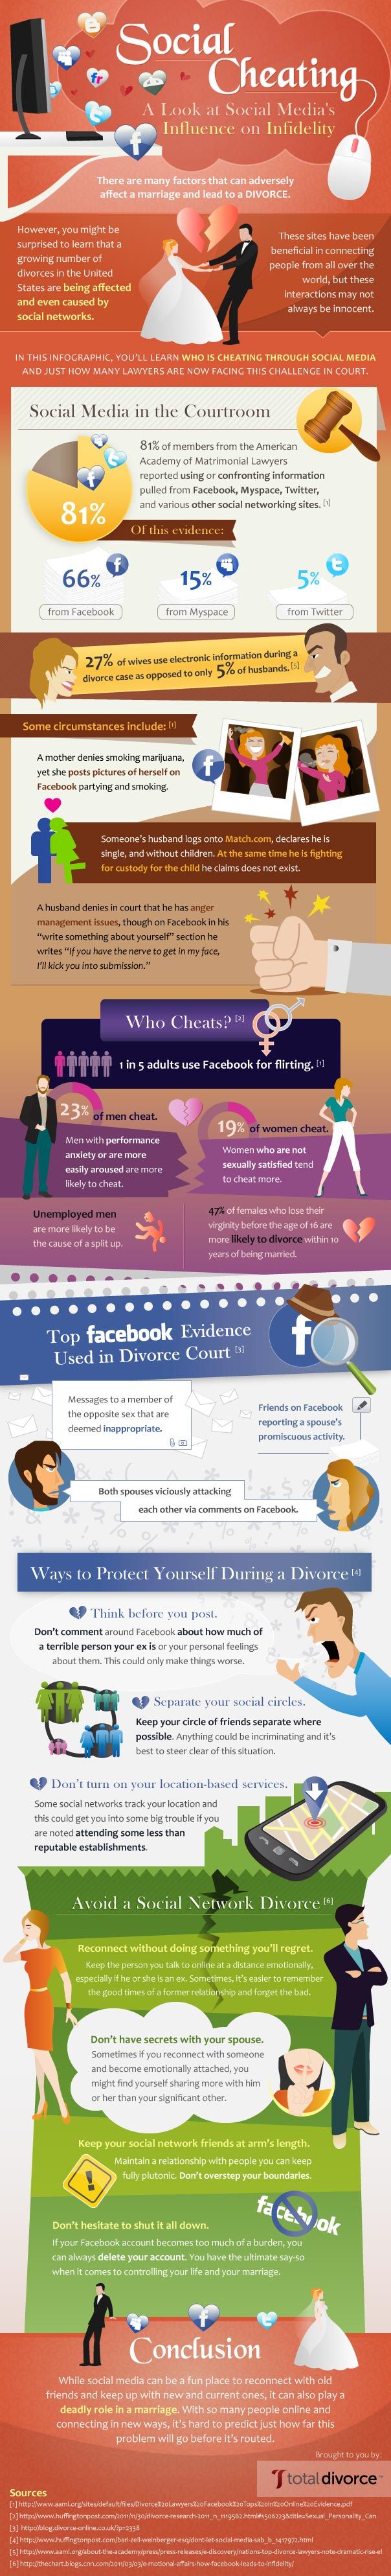 social-media-cheating-infographic